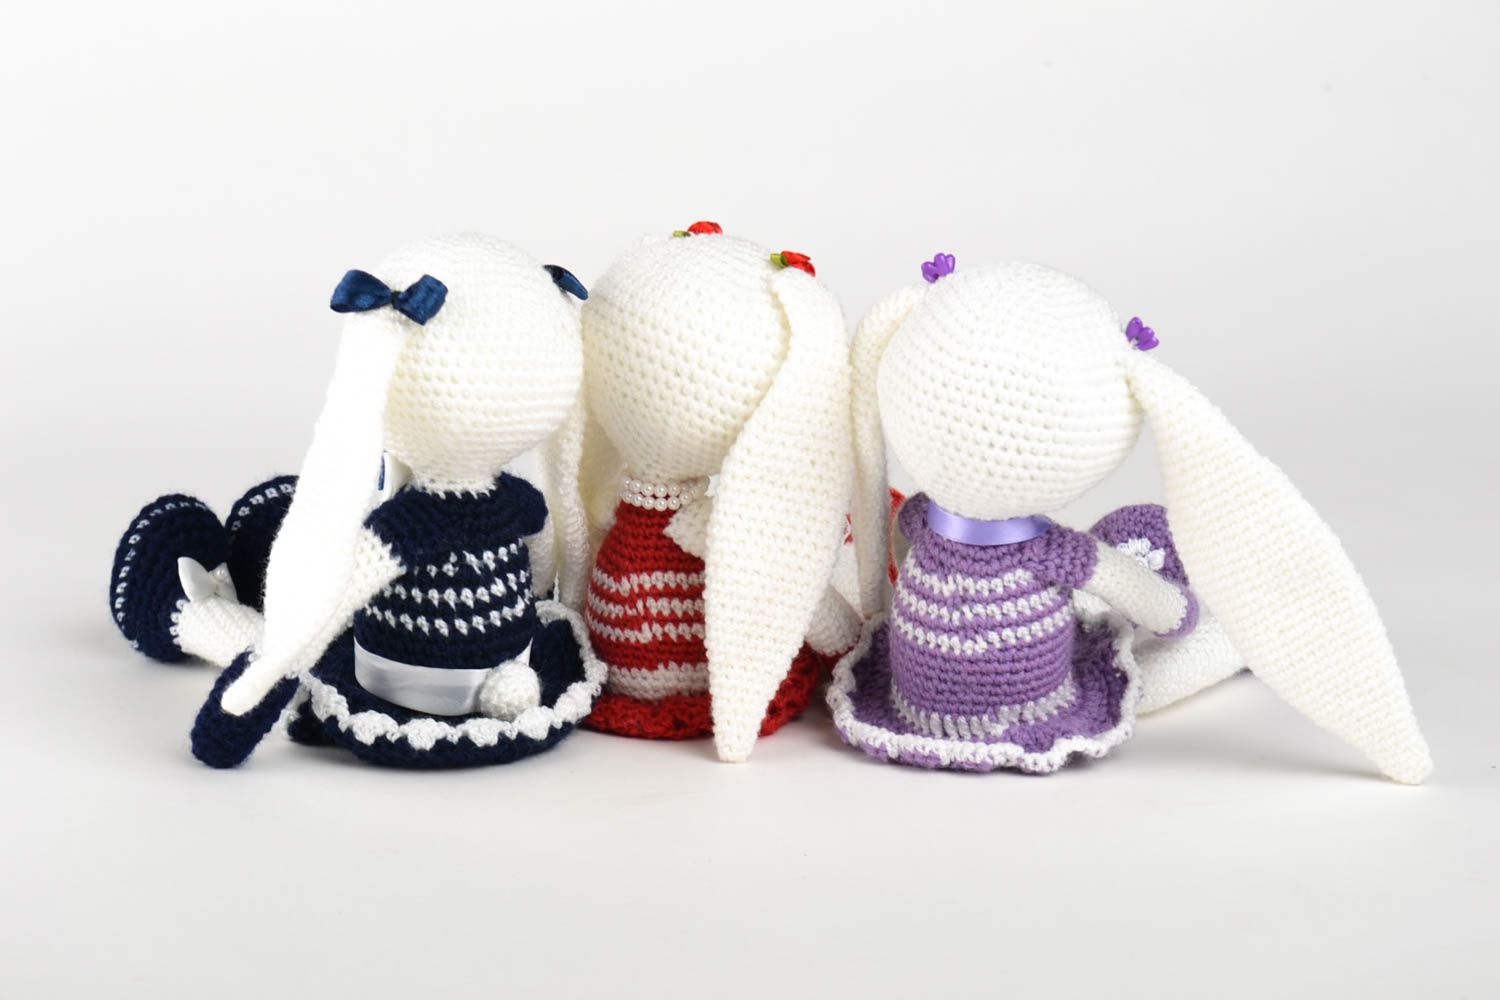 Set of three hand knitted stuffed plush rabbits in white red purple color 11,83,9 inches photo 3